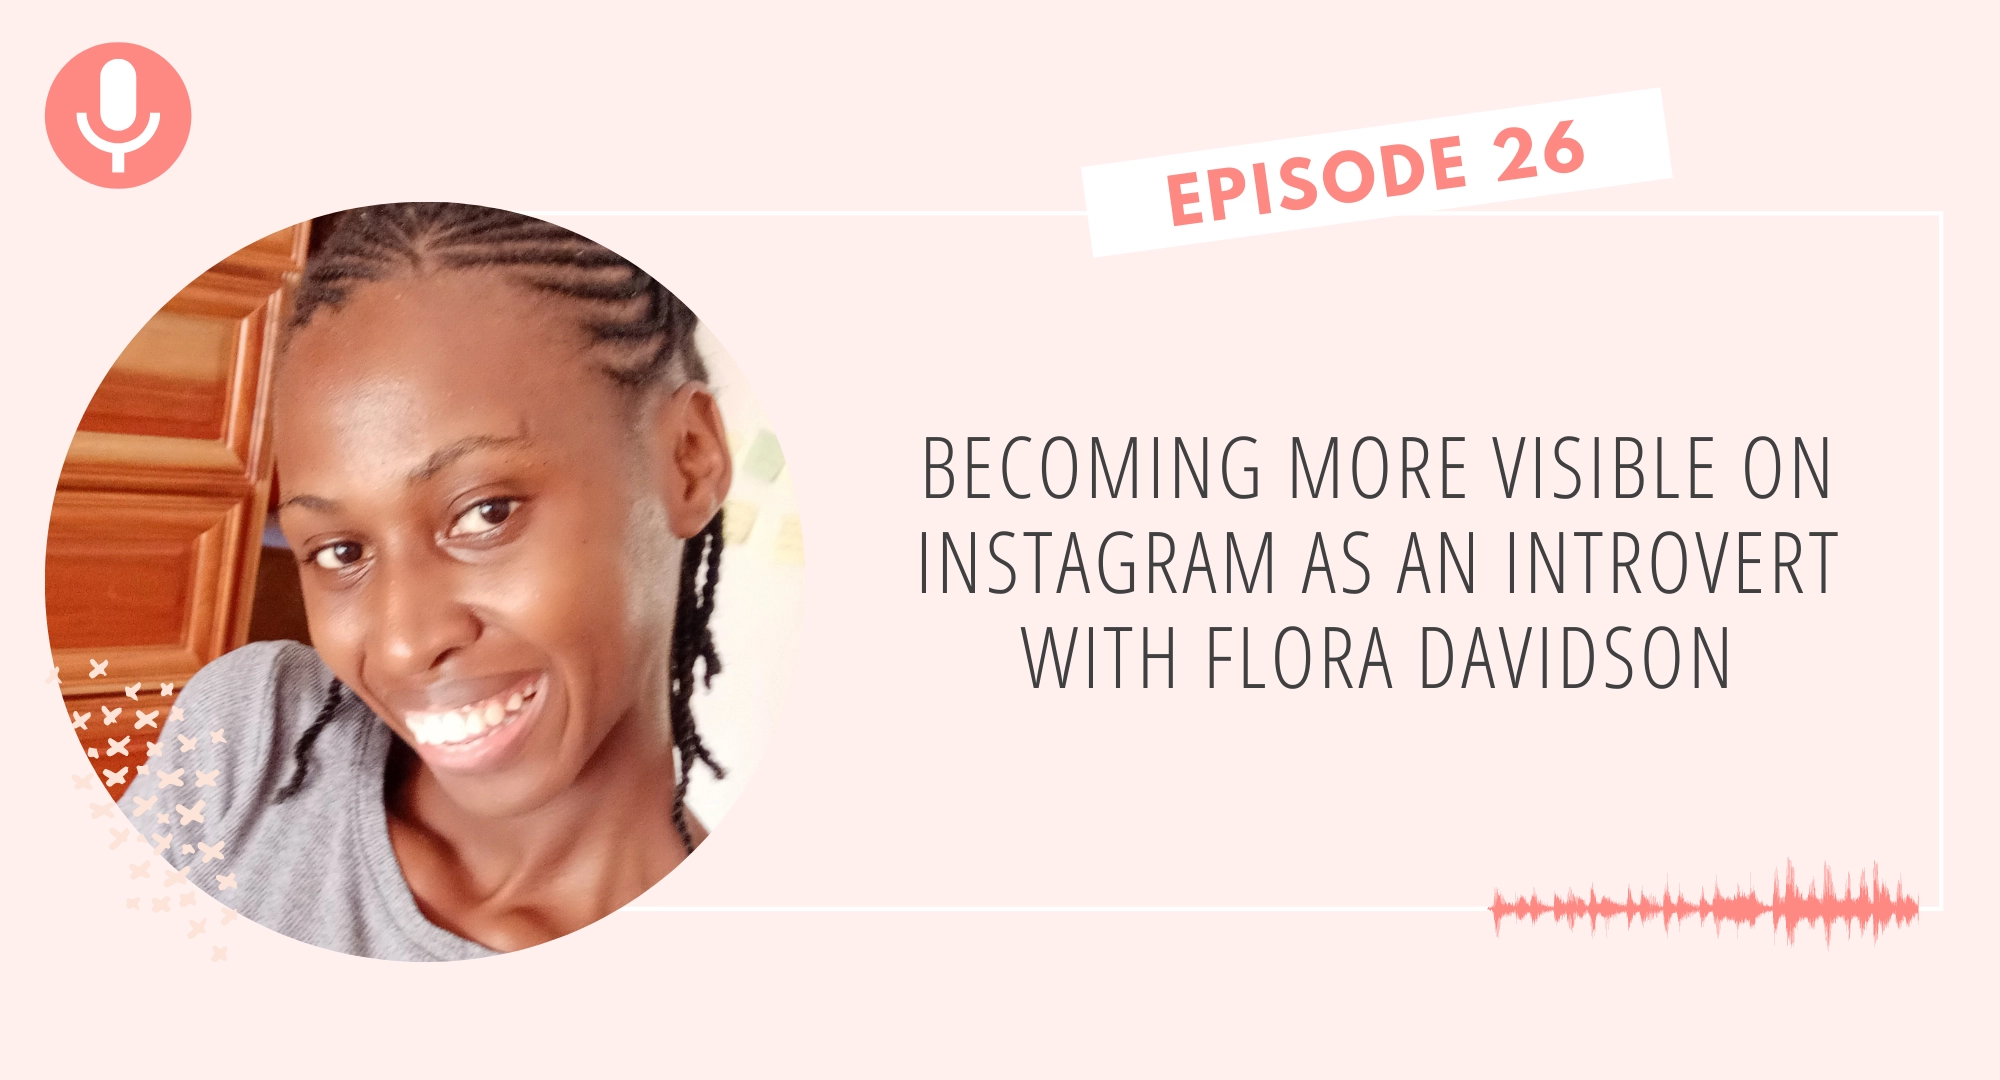 Becoming More Visible on Instagram as an Introvert with Flora Davidson